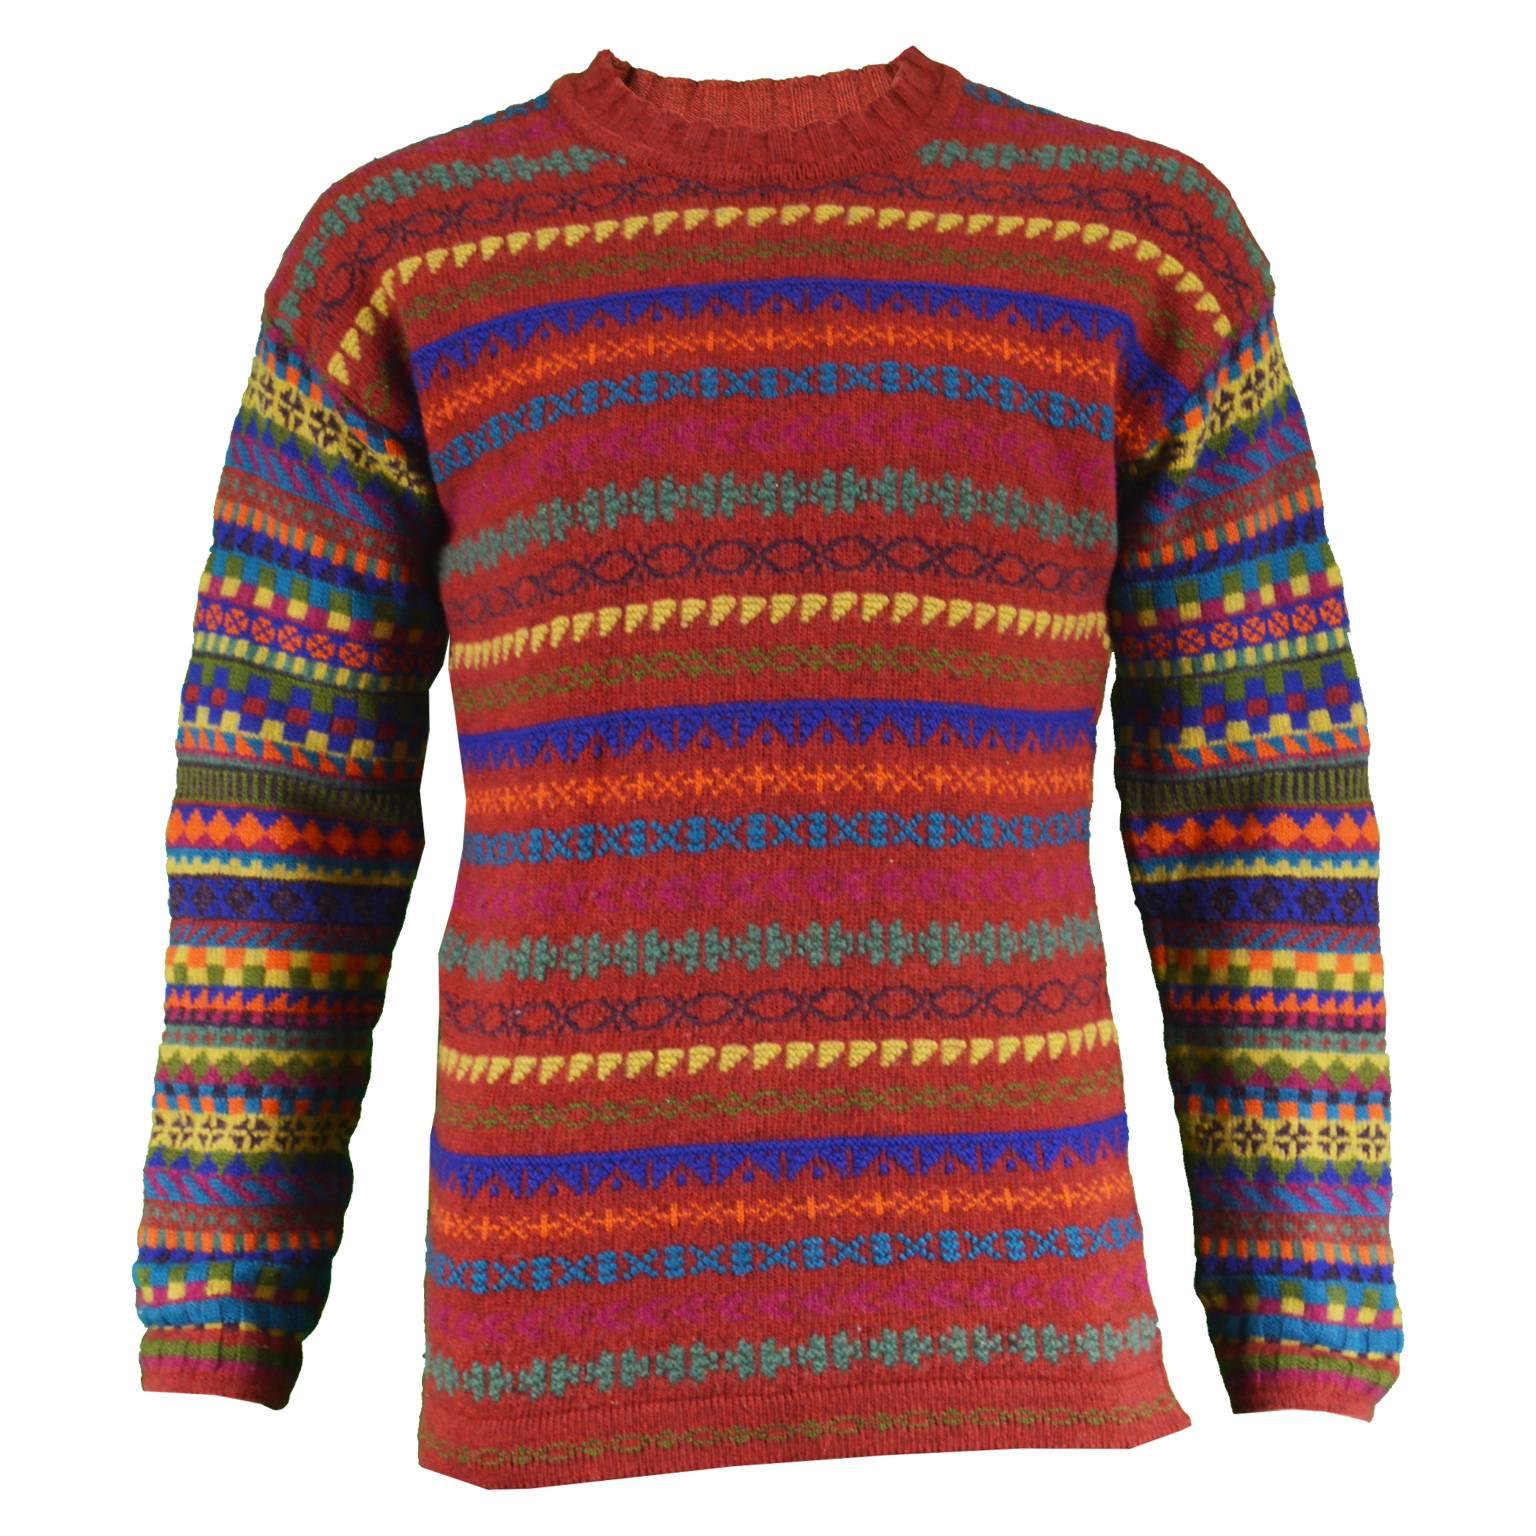 Kenzo Homme Men's Red Geometric Knit Vintage Panelled Sweater, 1980s For Sale